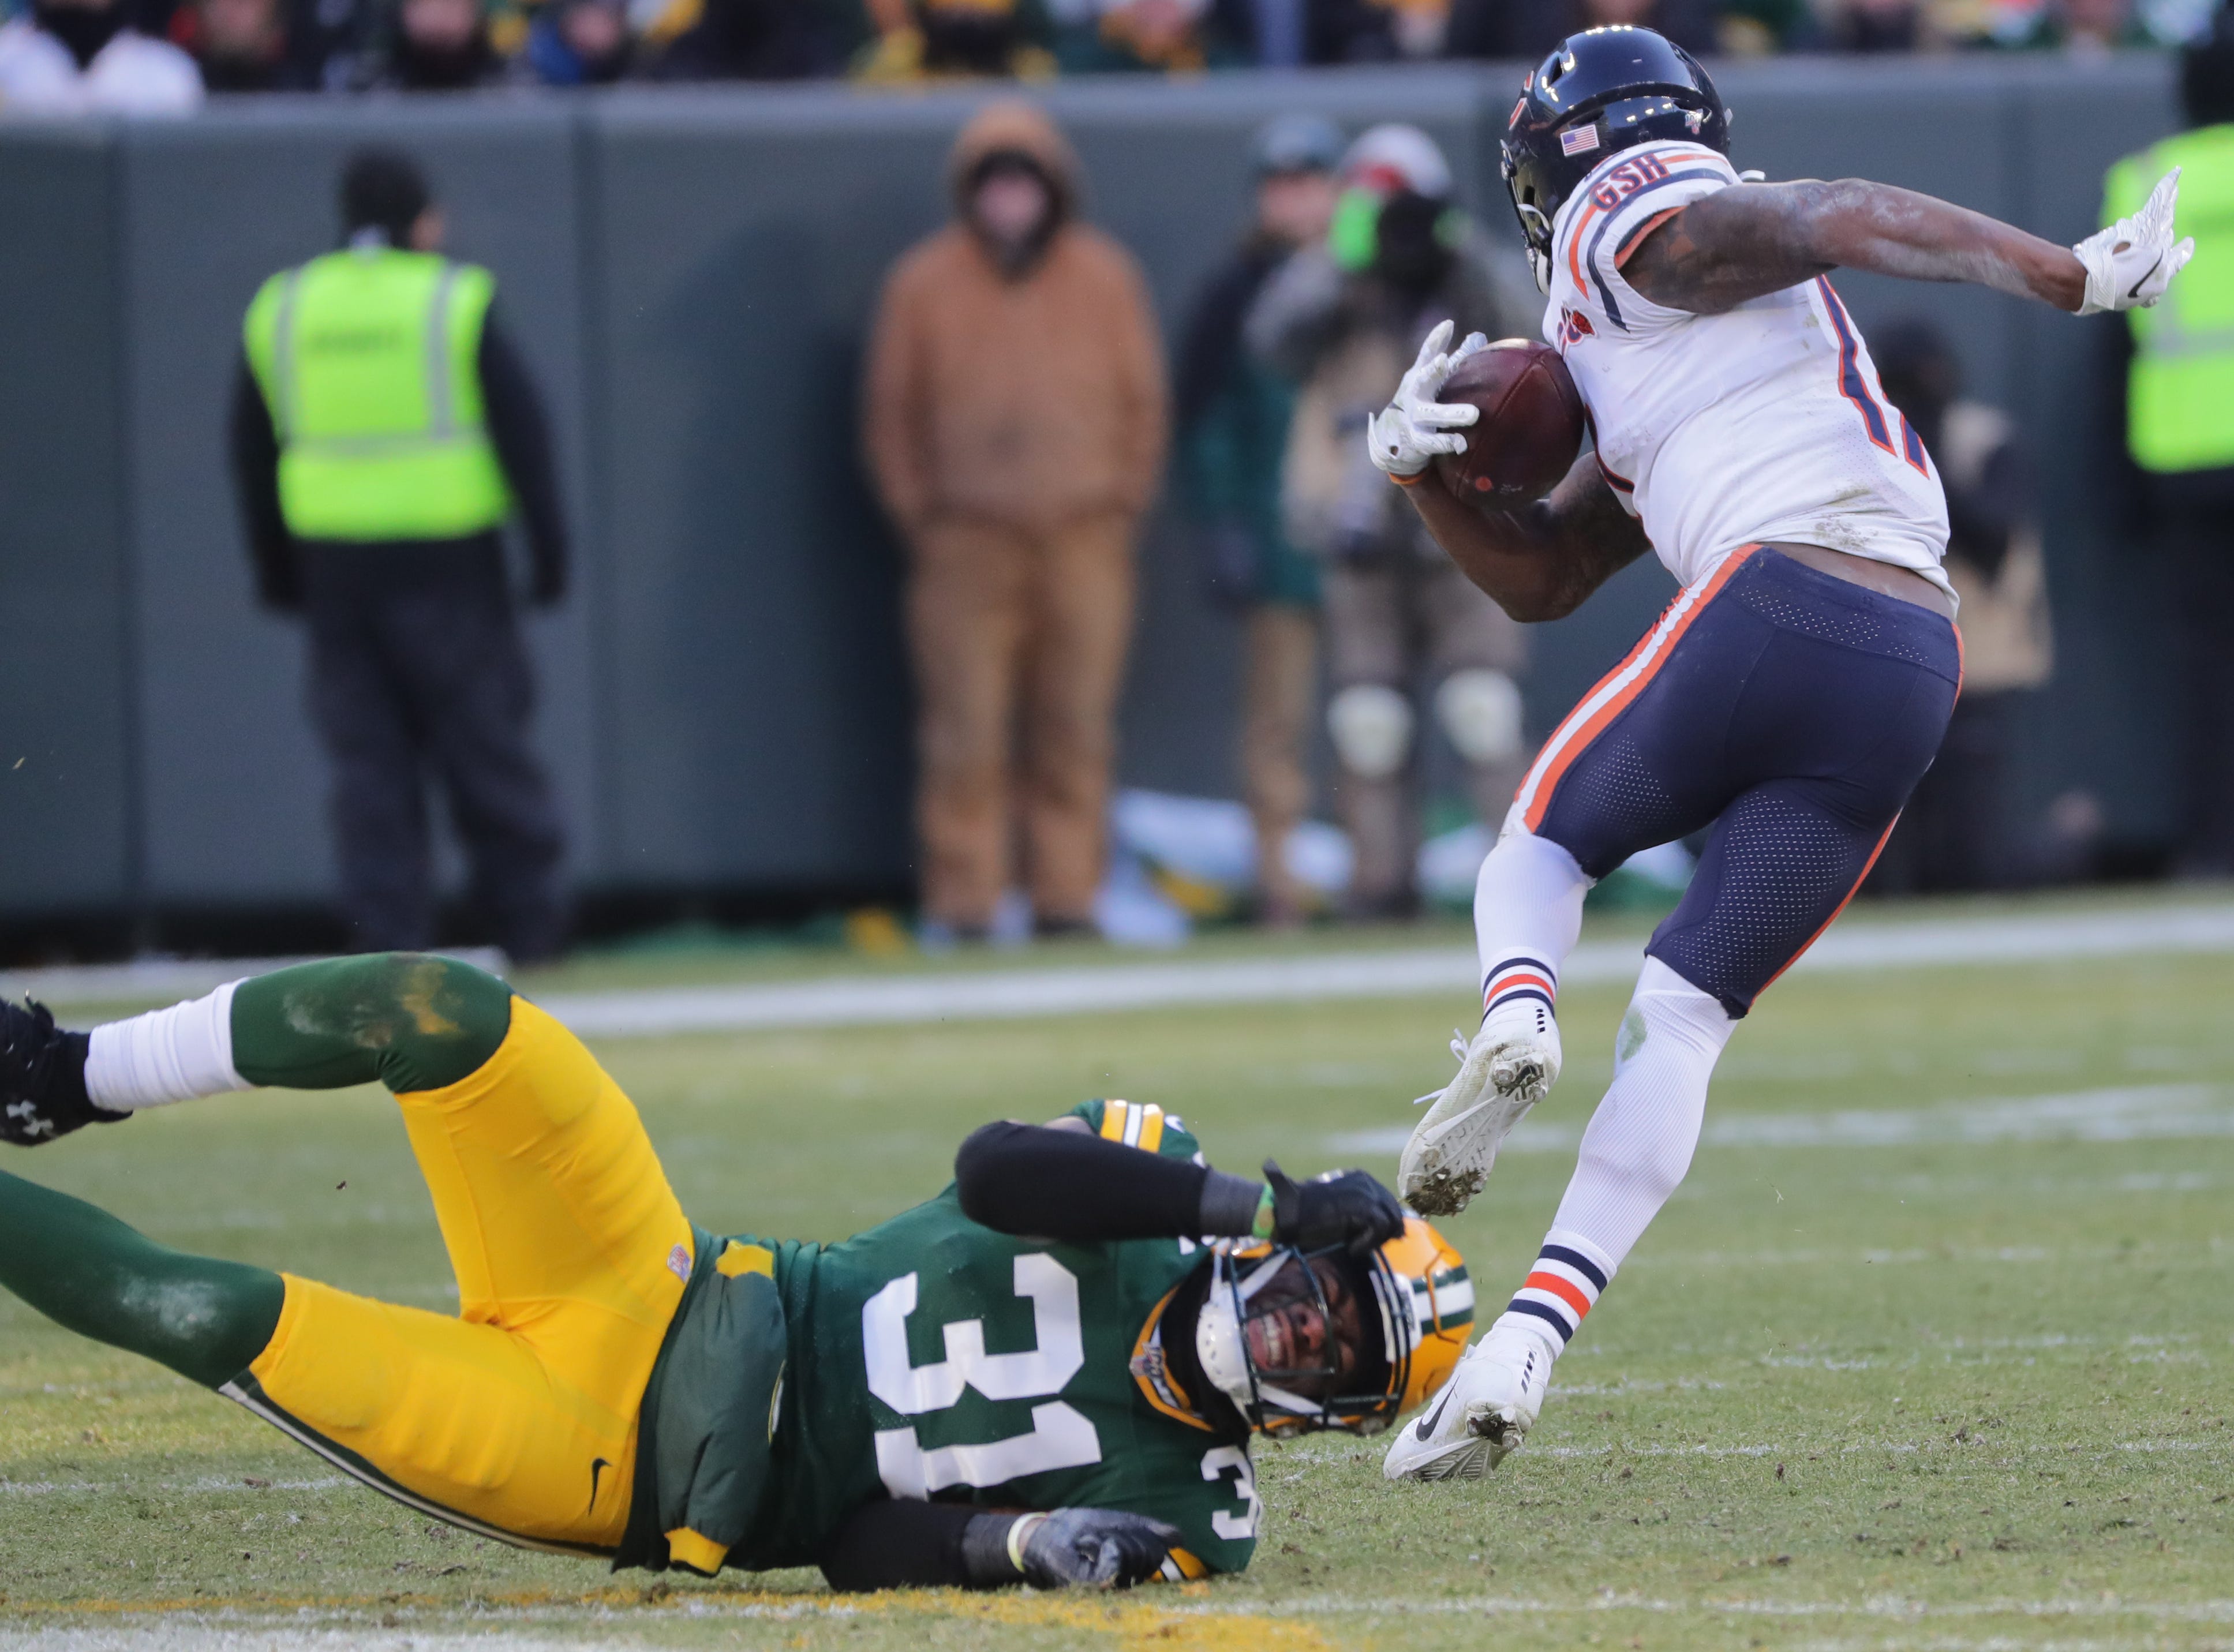 Green Bay Packers strong safety Adrian Amos (31) misses a fingertip tackle on Chicago Bears wide receiver Anthony Miller (17) during the fourth quarter of their game Sunday, December 15, 2019 at Lambeau Field in Green Bay, Wis. The Green Bay Packers beat the Chicago Bears 21-13.